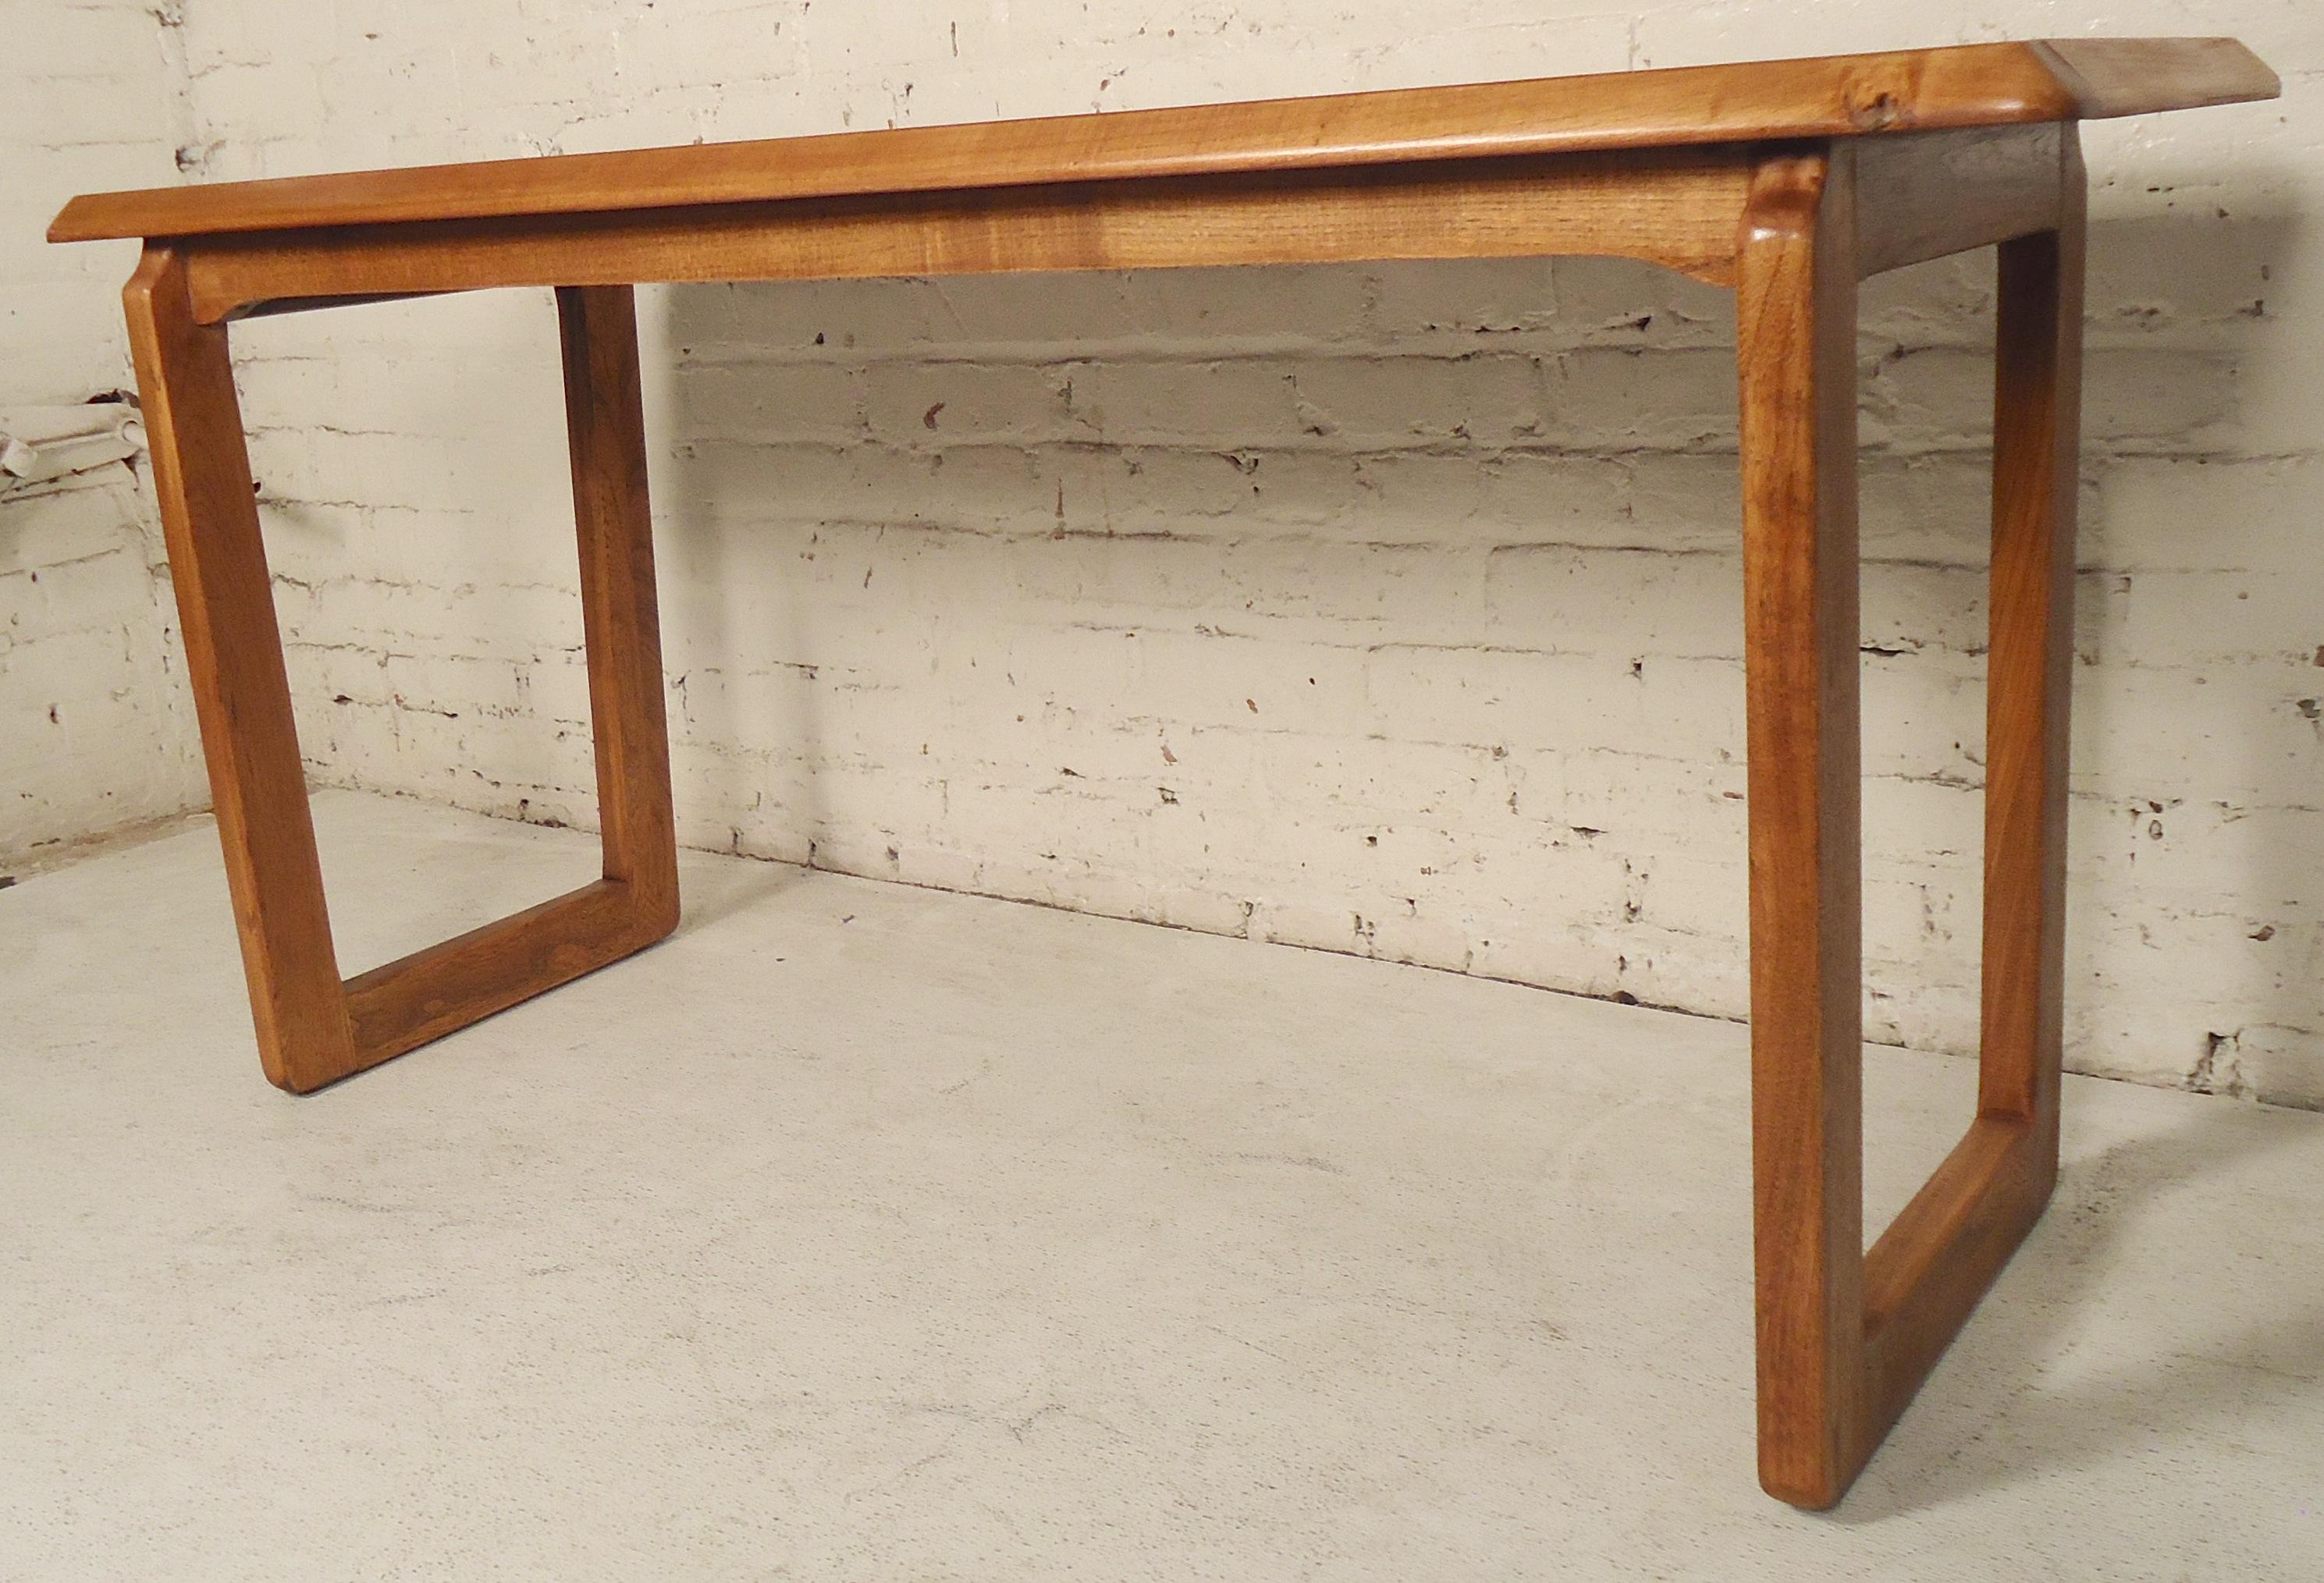 Walnut console table with accenting oak trim and legs. Simple and sturdy design is great for home or office.

(Please confirm item location - NY or NJ - with dealer).
 